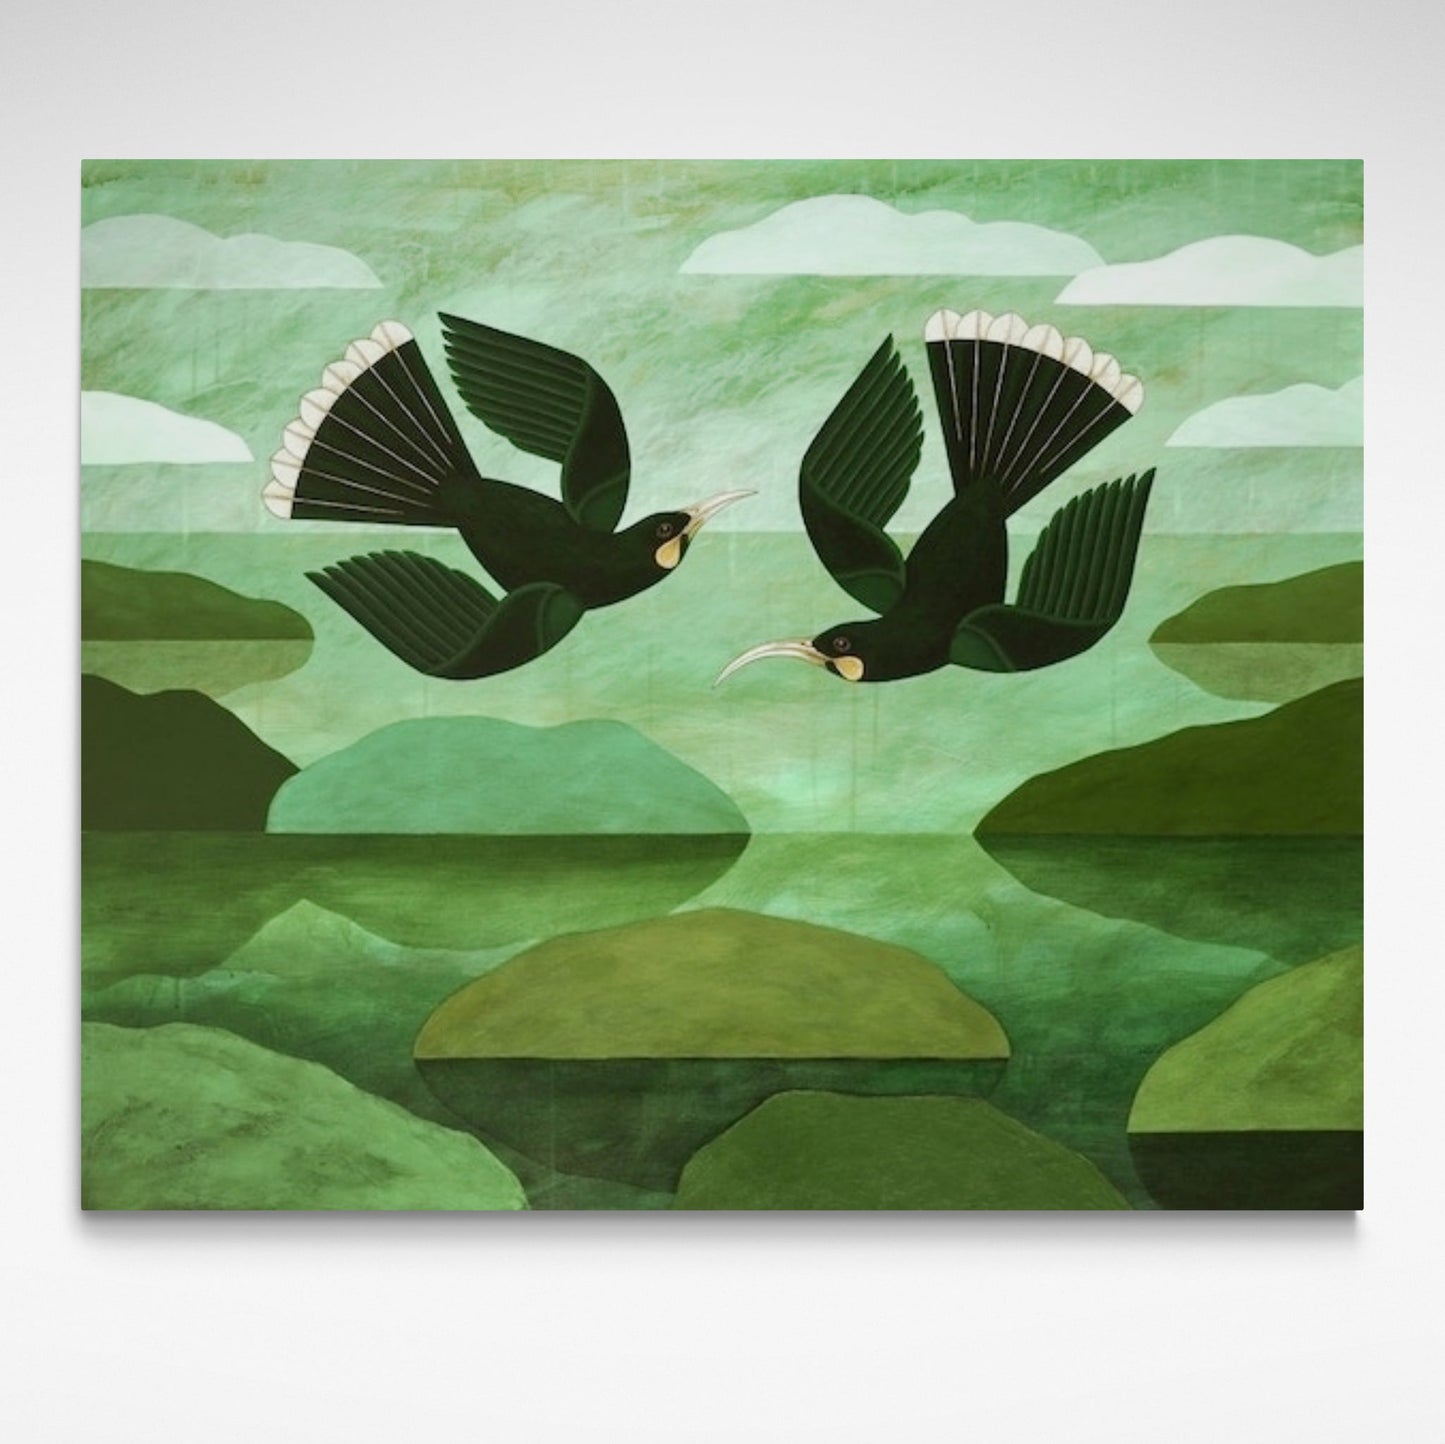 Two Huia flying in a green landscape